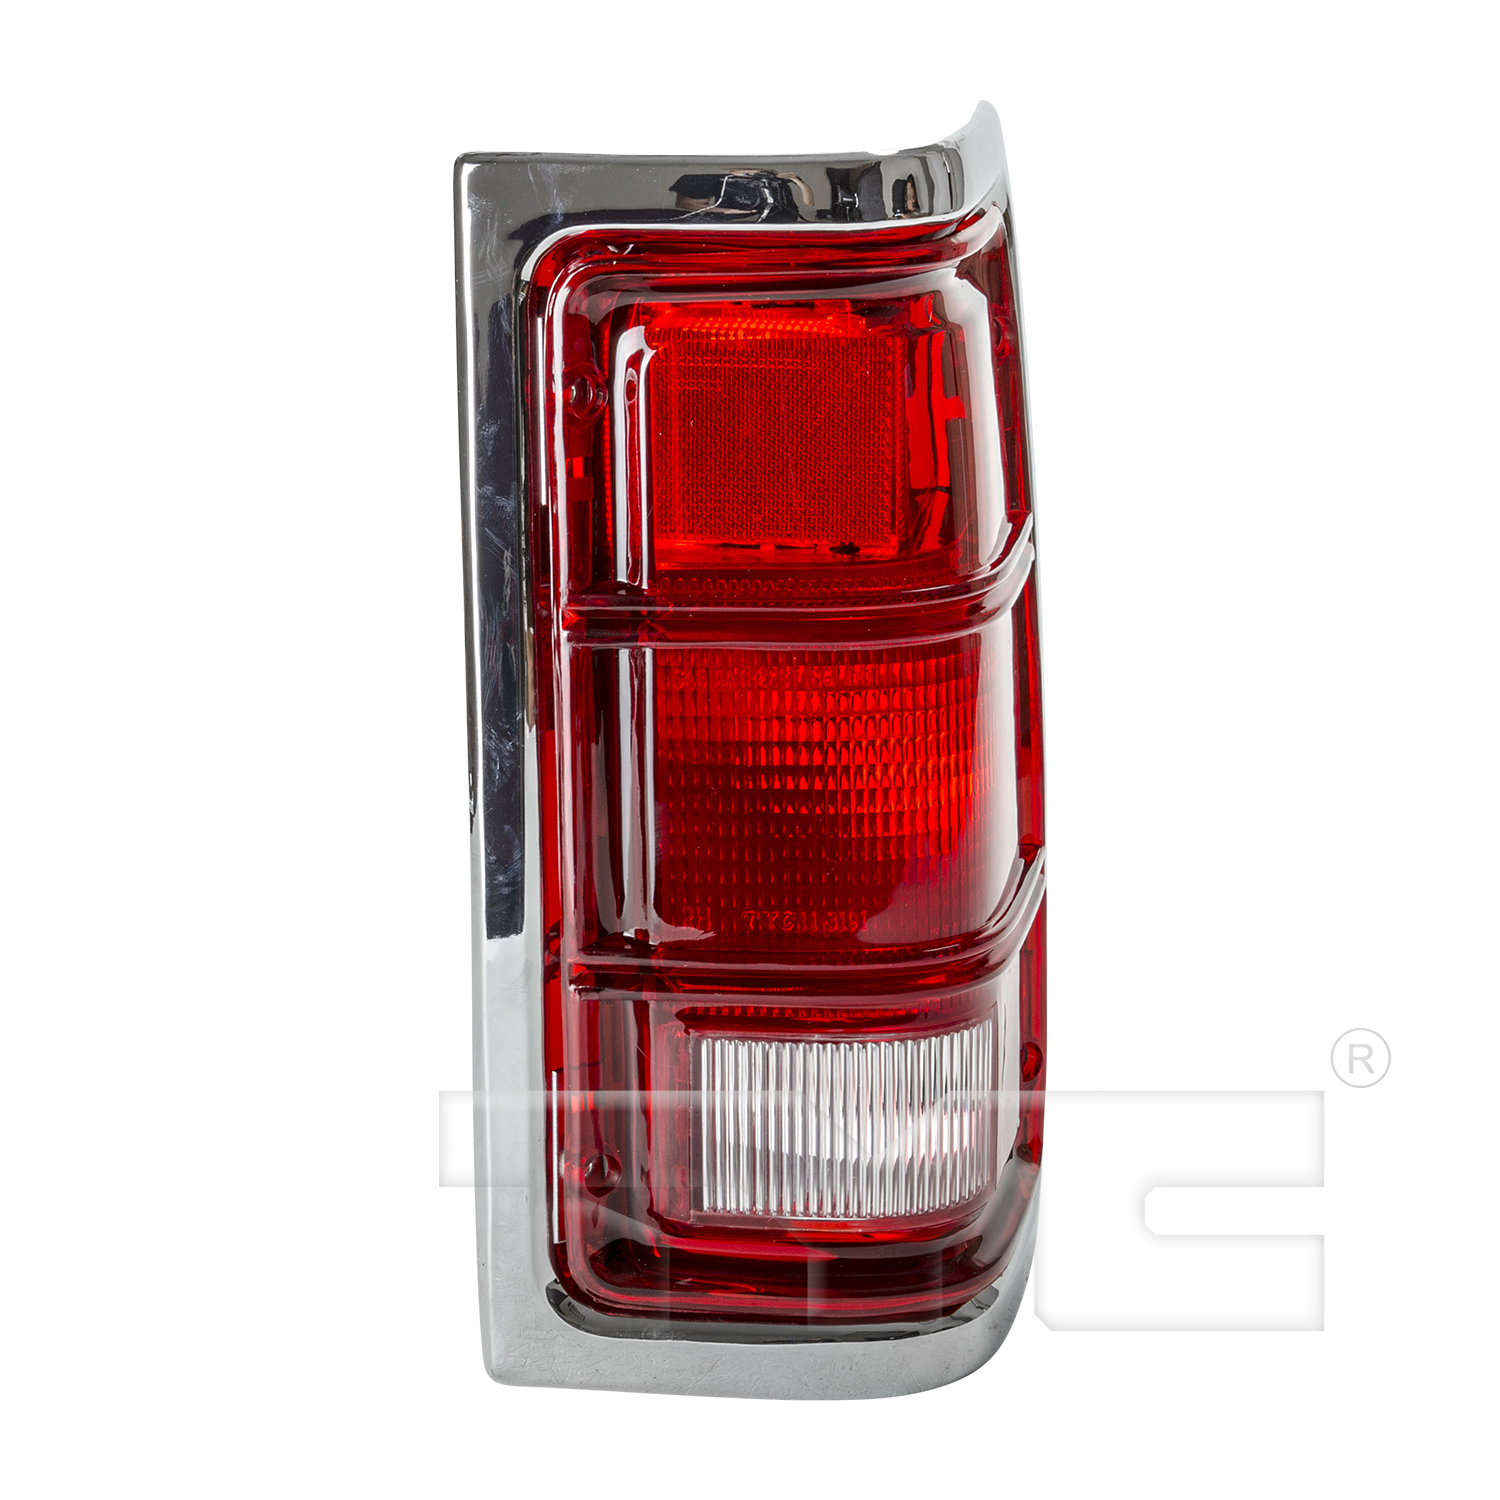 Aftermarket TAILLIGHTS for DODGE - W350, W350,87-91,RT Taillamp lens